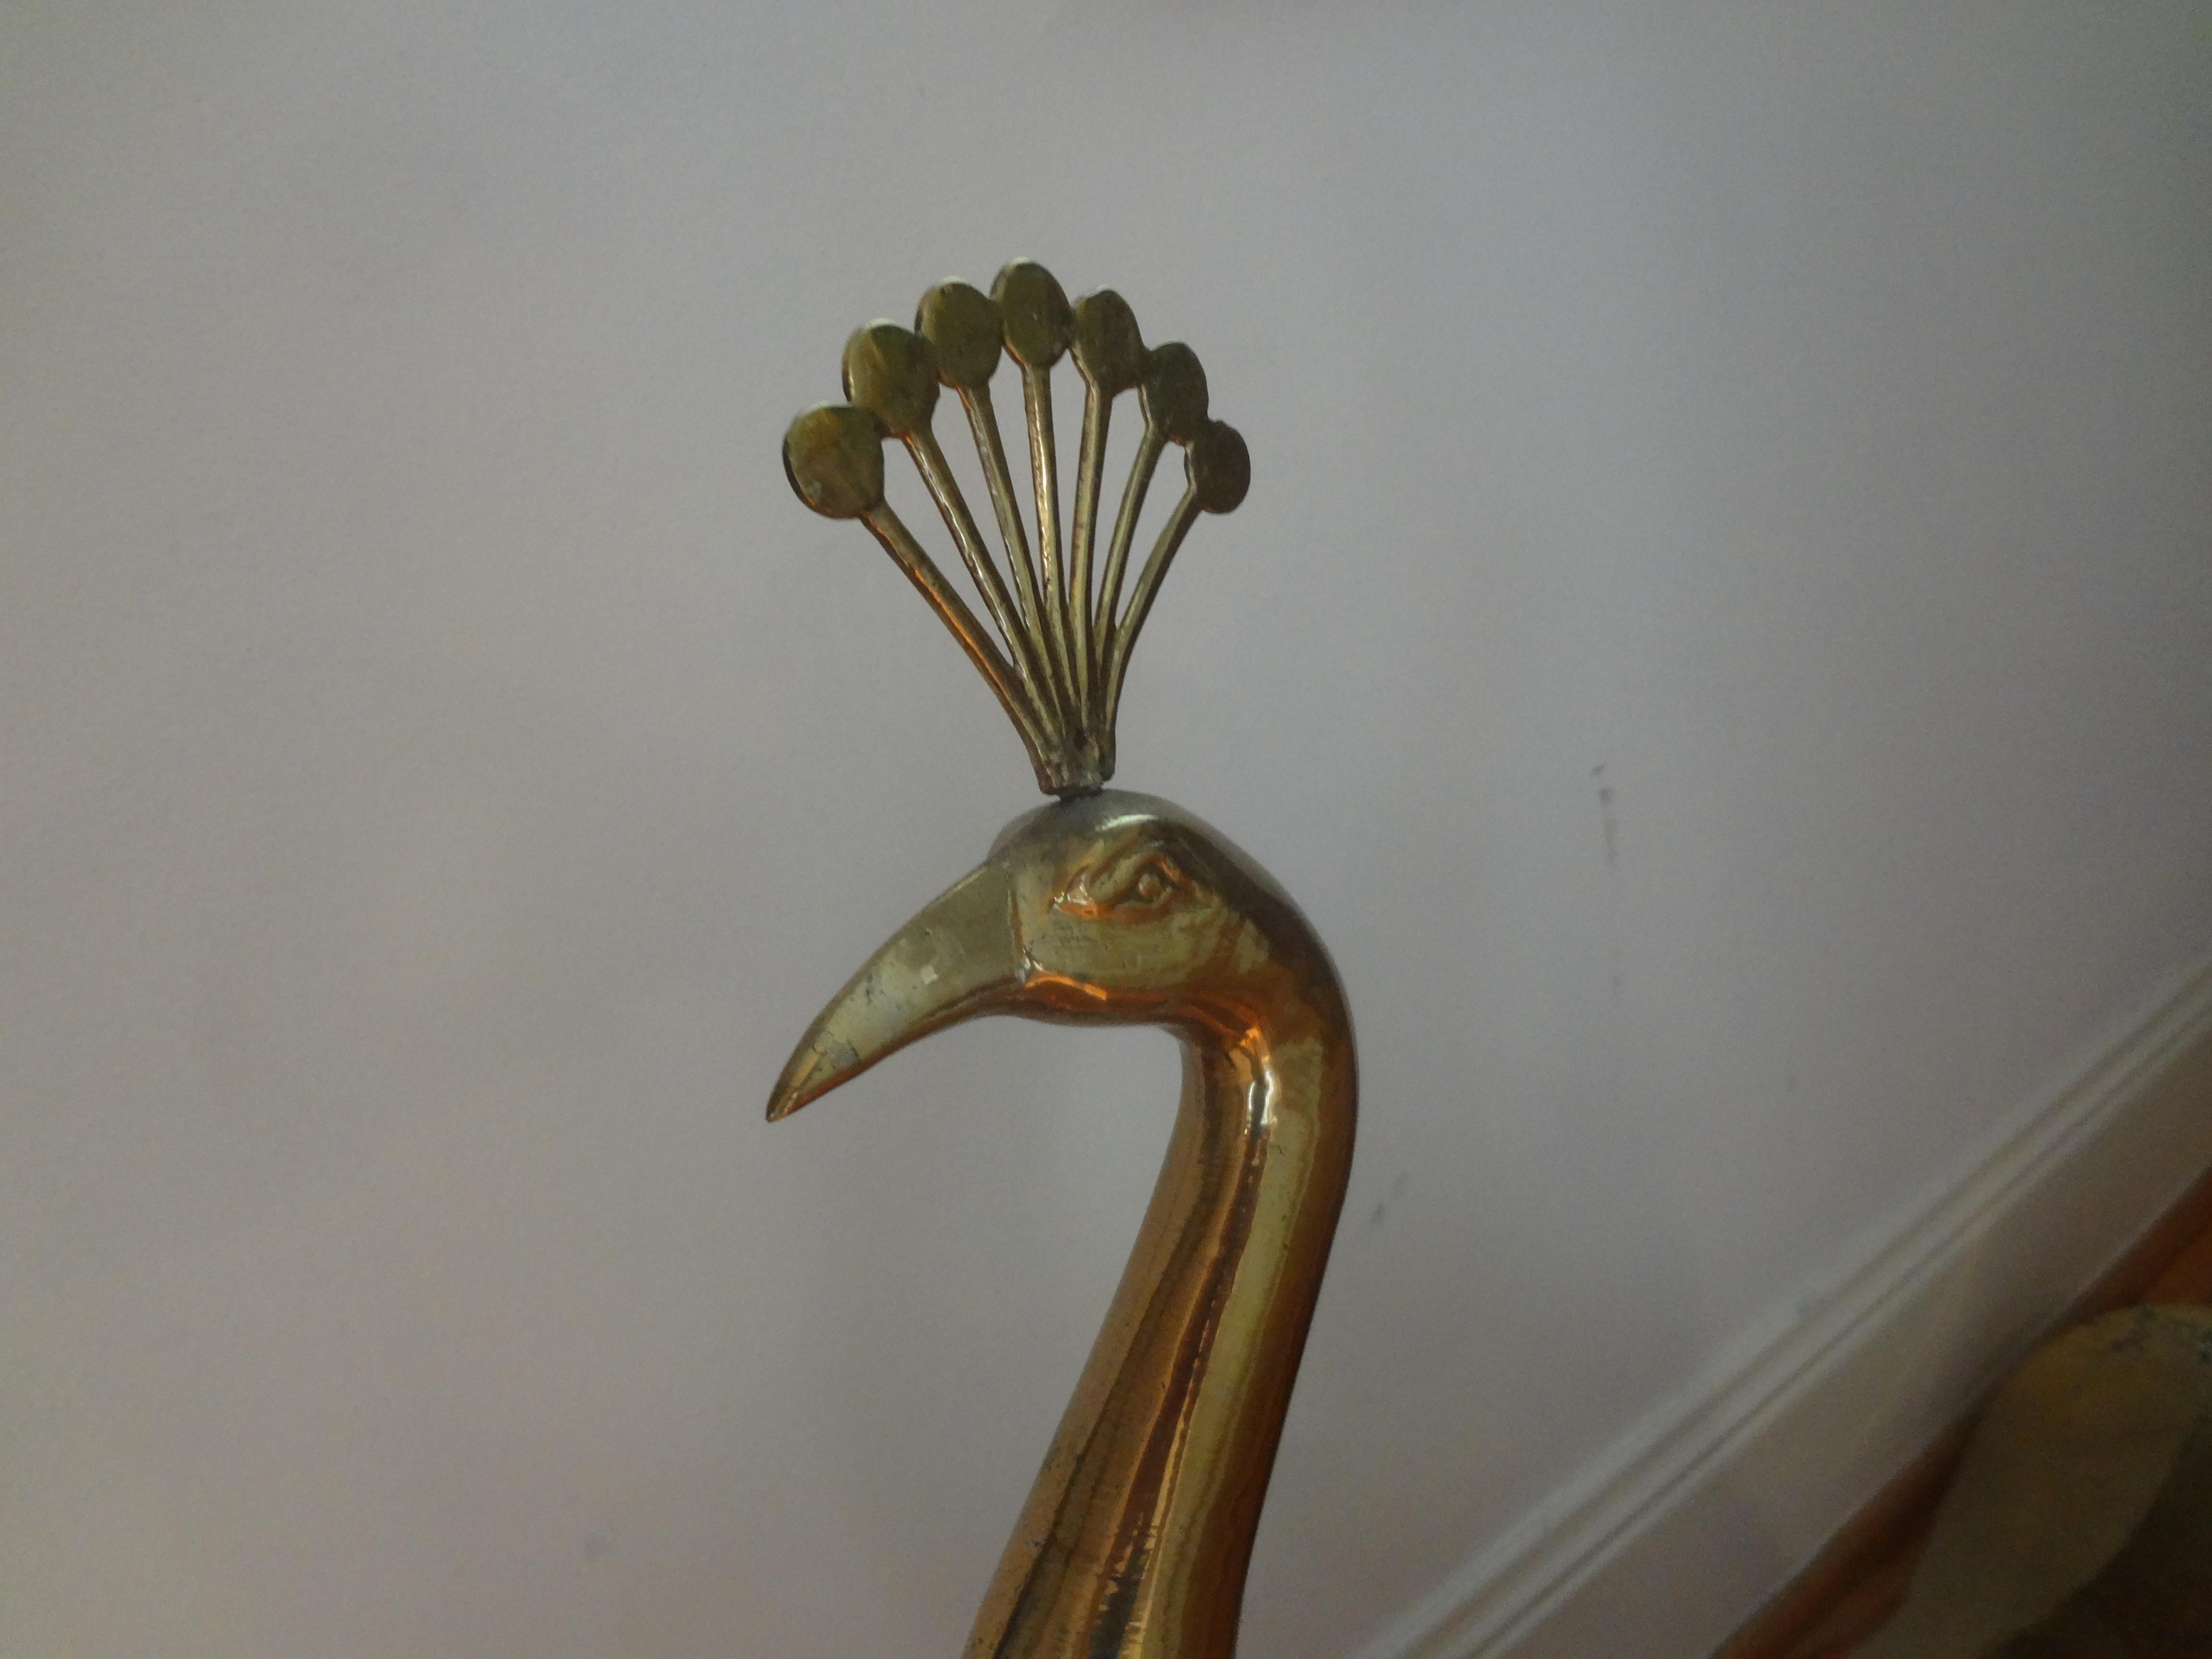 Large Hollywood Regency brass peacock statue or sculpture. This animal statue or figure would make a great addition to a midcentury or Hollywood Regency interior.